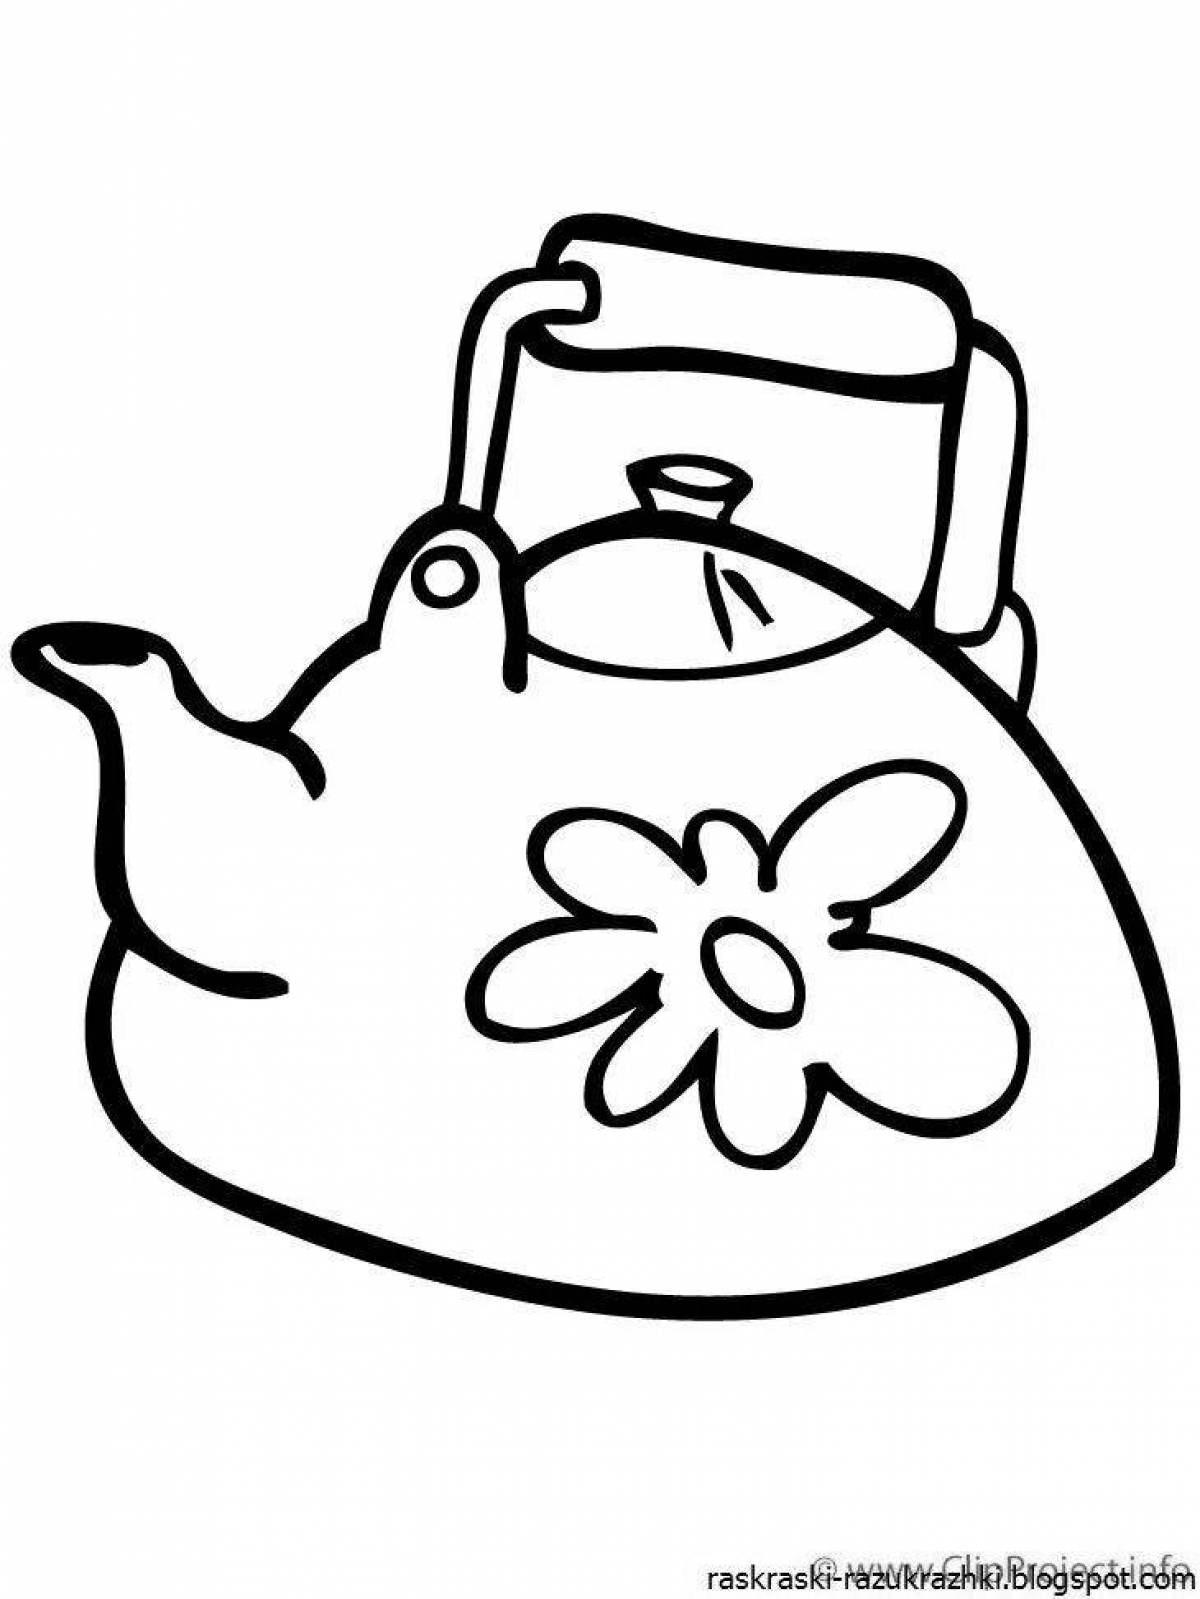 A fascinating teapot coloring book for the little ones